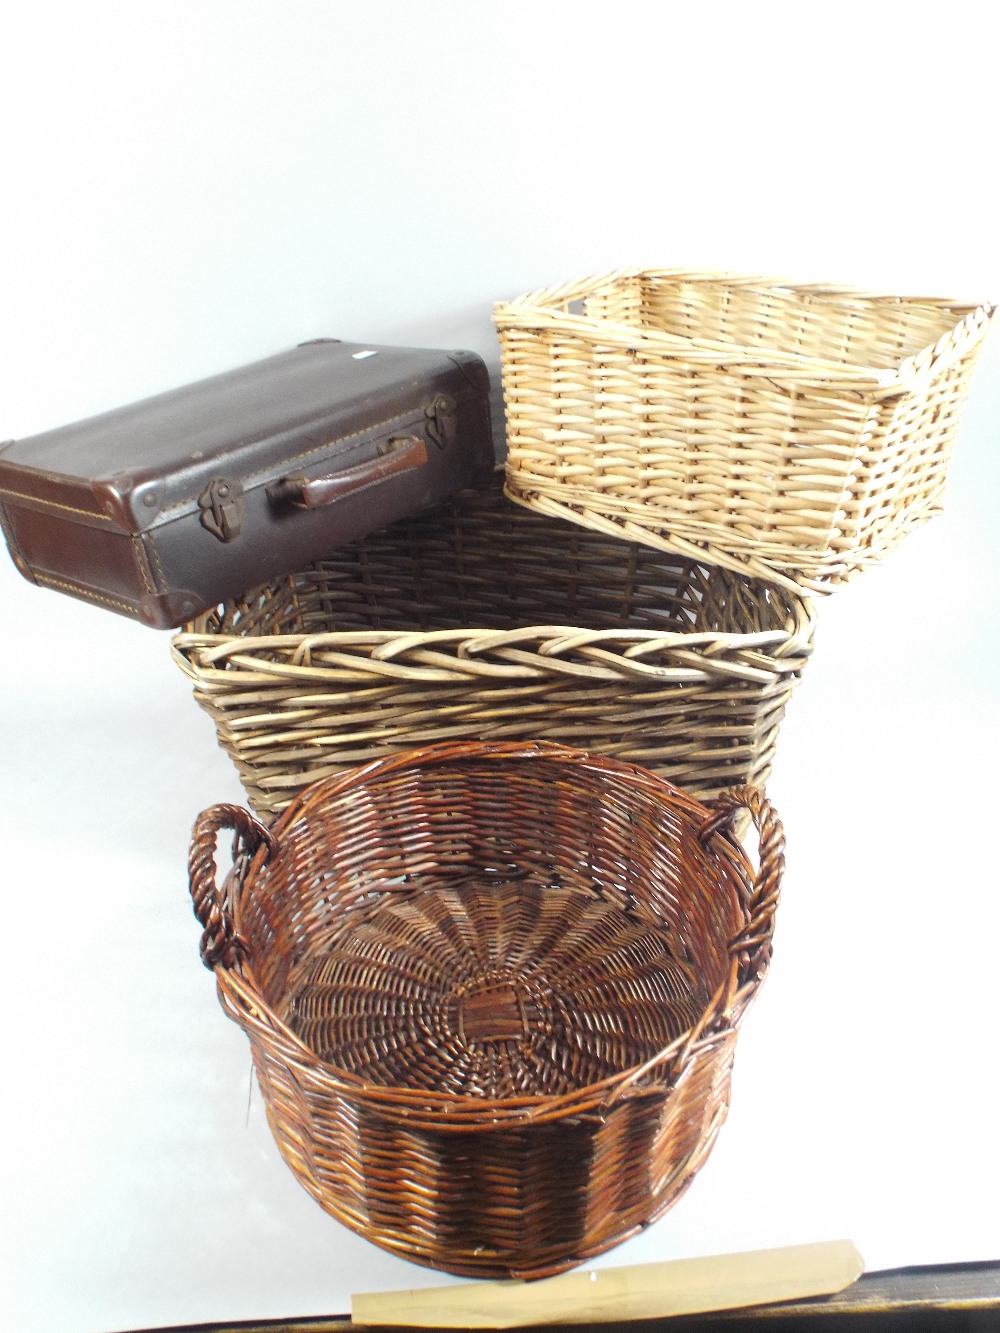 Three Wicker Shopping Baskets and a Small Vintage Case